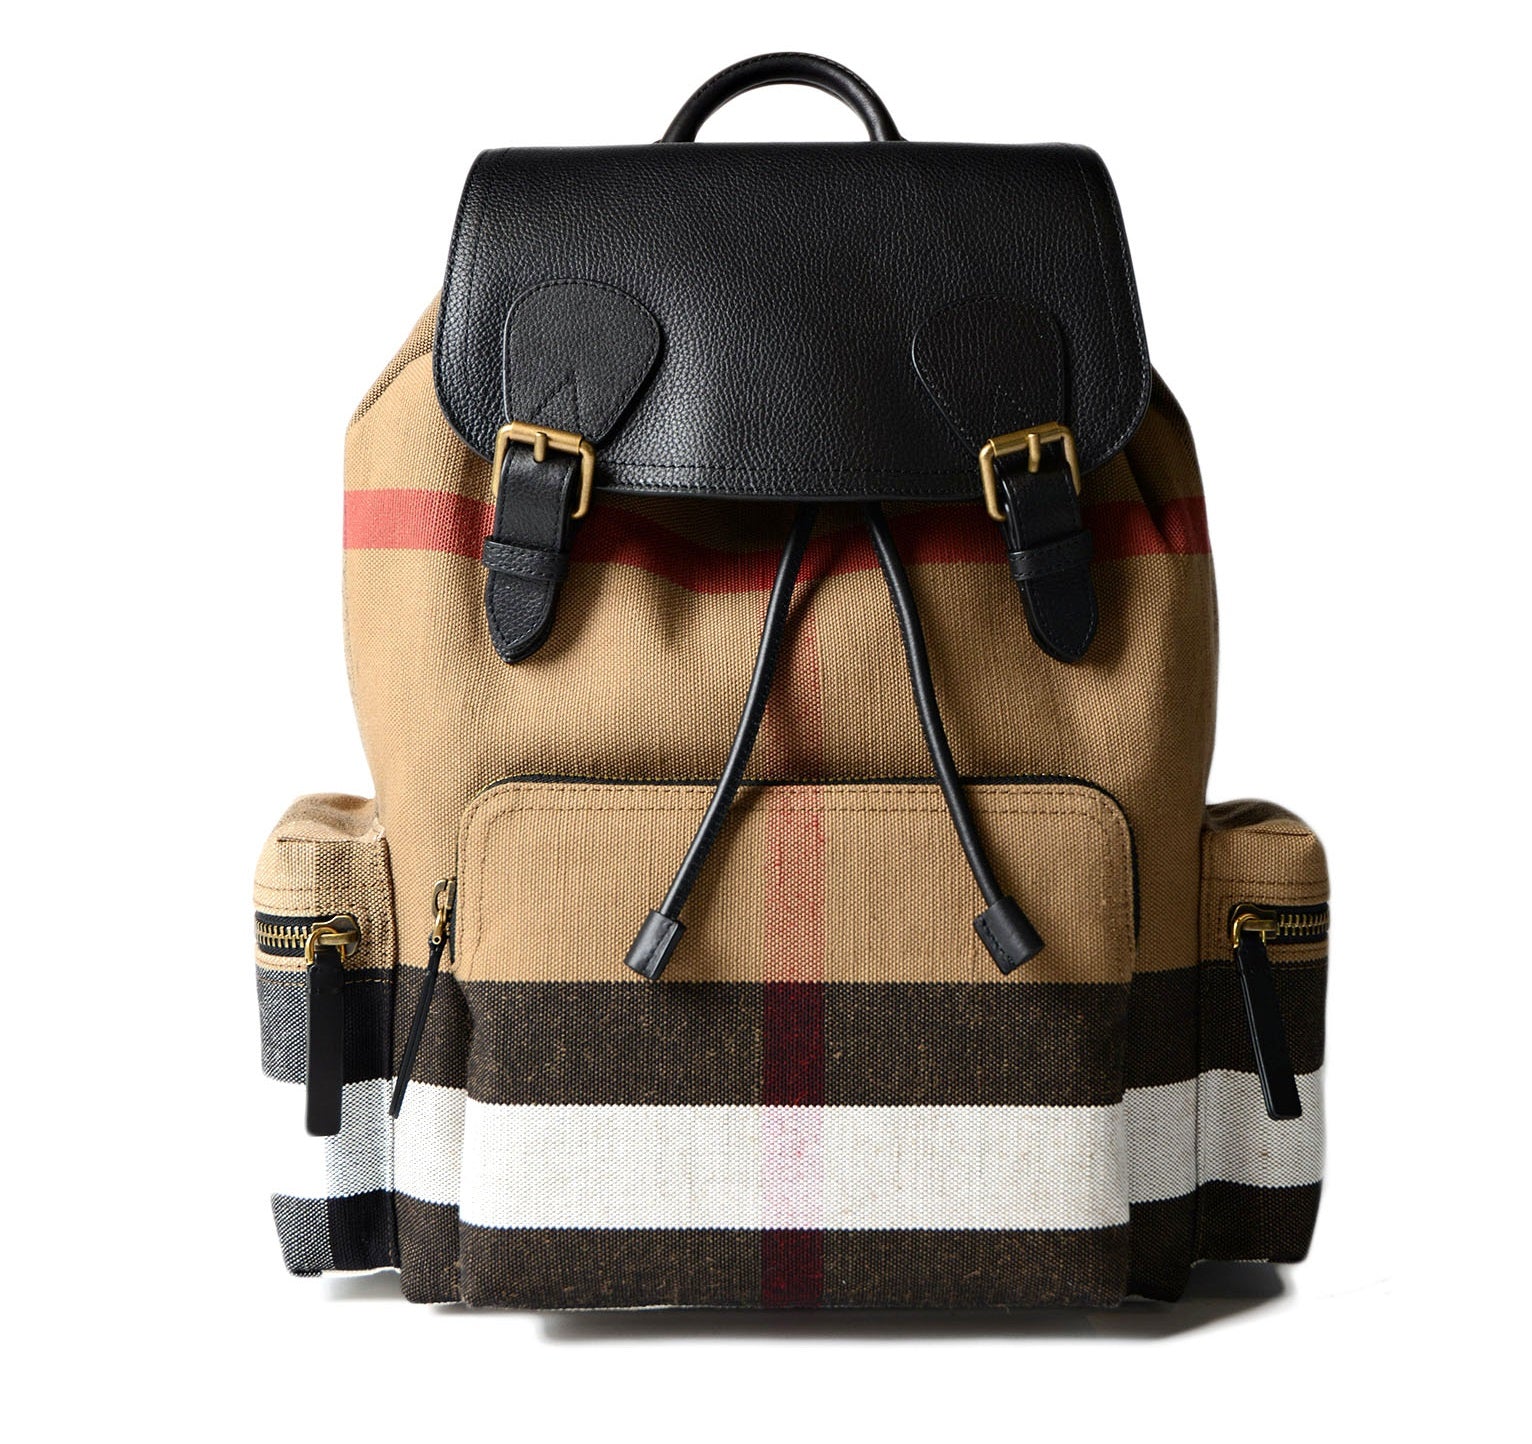 【 Burberry 】Large Rucksack in Canvas Check and Leather Brown 4052565 - covocovo